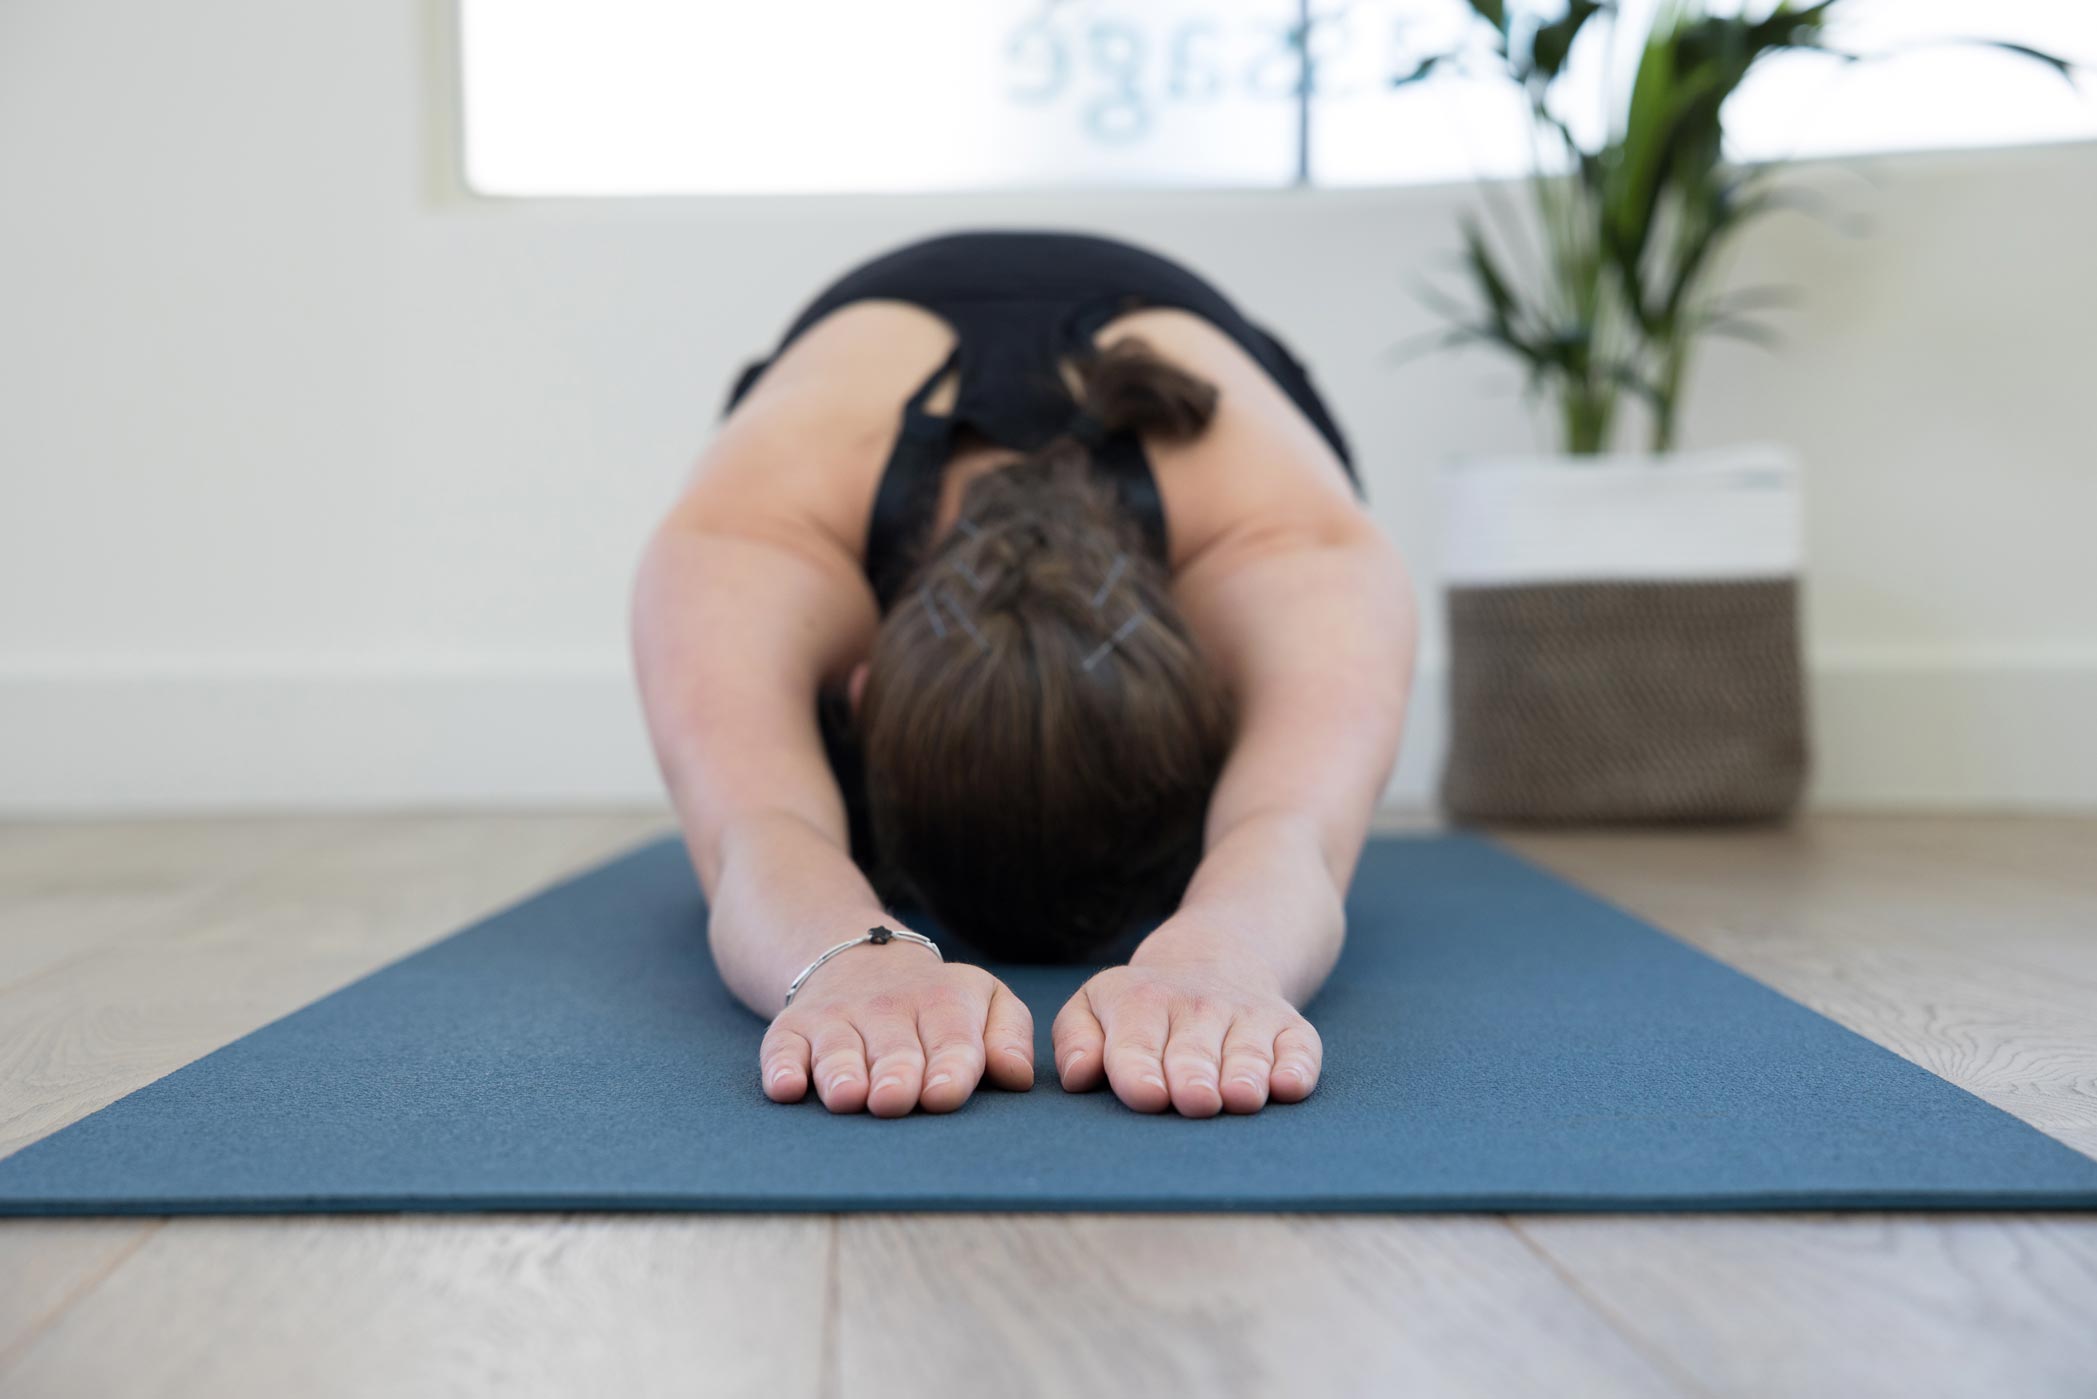 A lady relaxes on a yoga mat during a health & fitness photography photo shoot in London